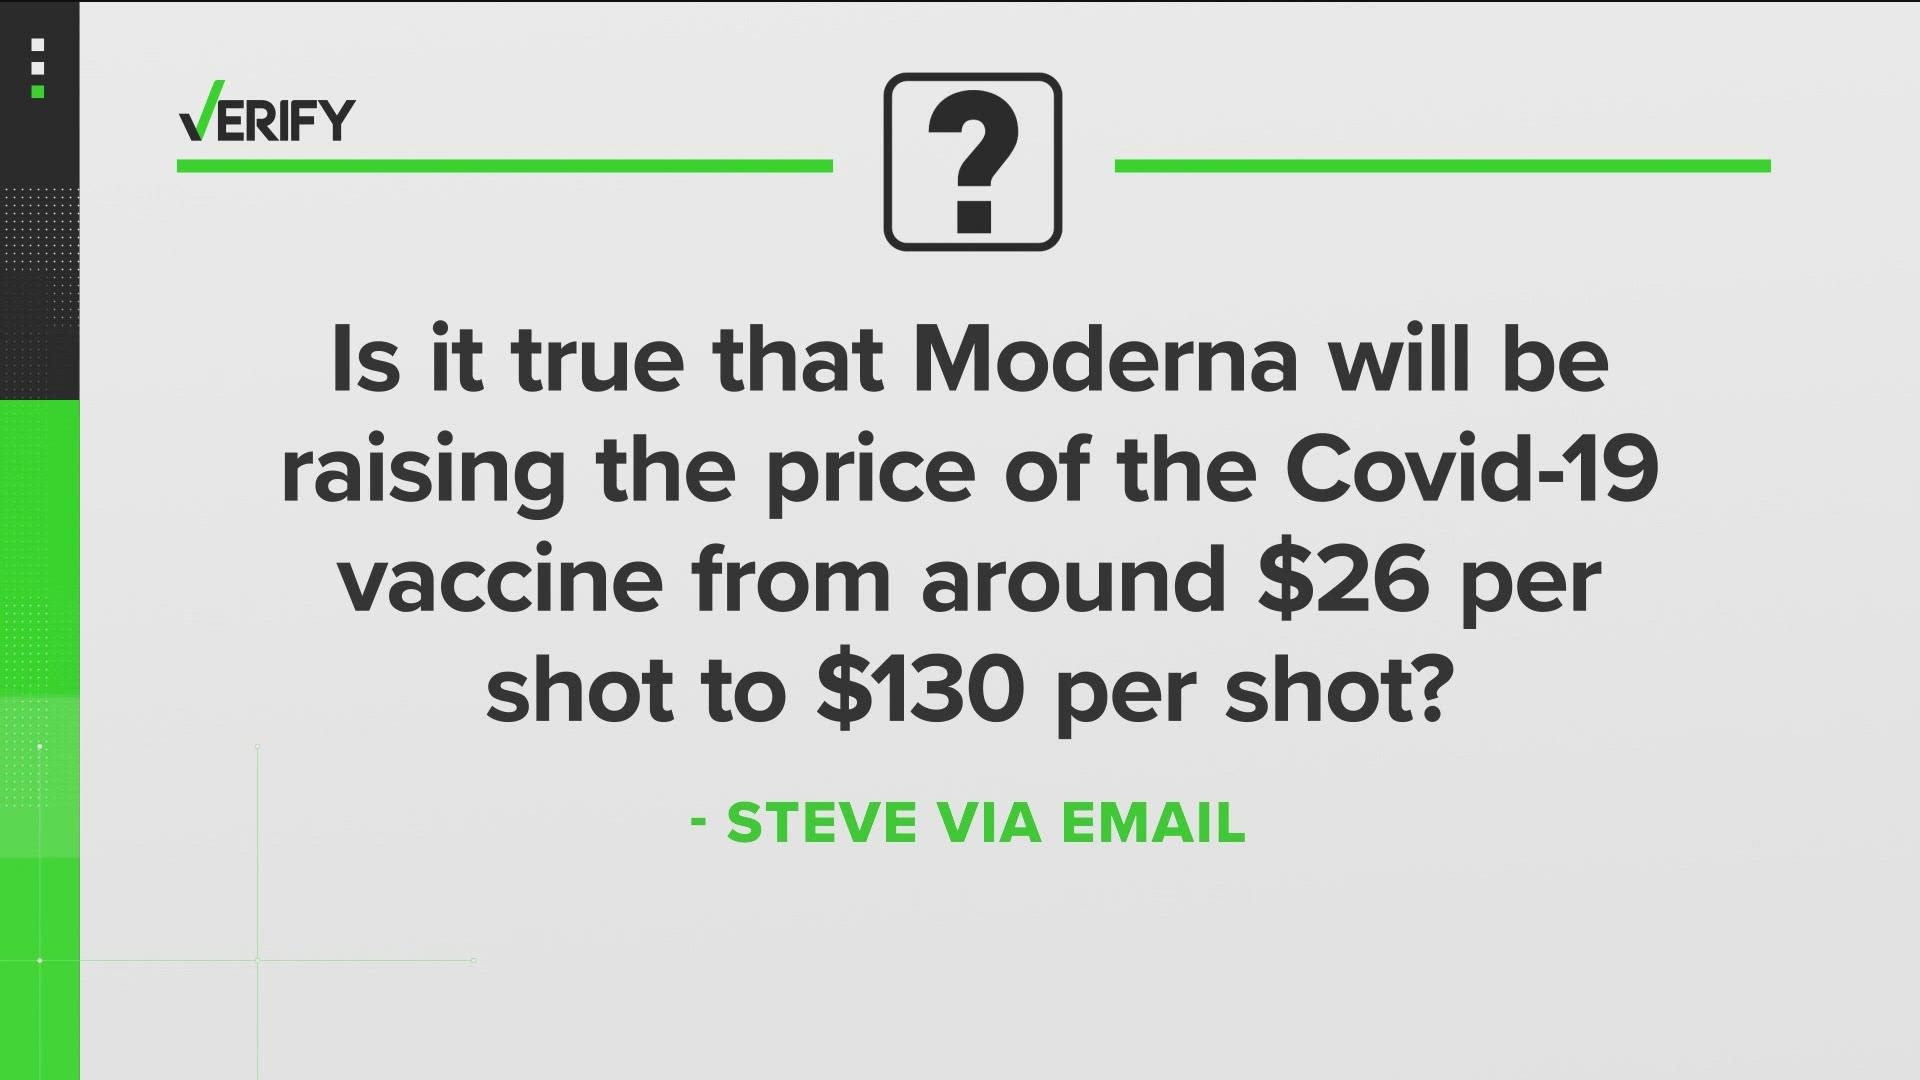 The government-paid COVID-19 vaccines may soon runout, which has some concerned about future commercial prices. KVUE's Erica Proffer set out to find answers.